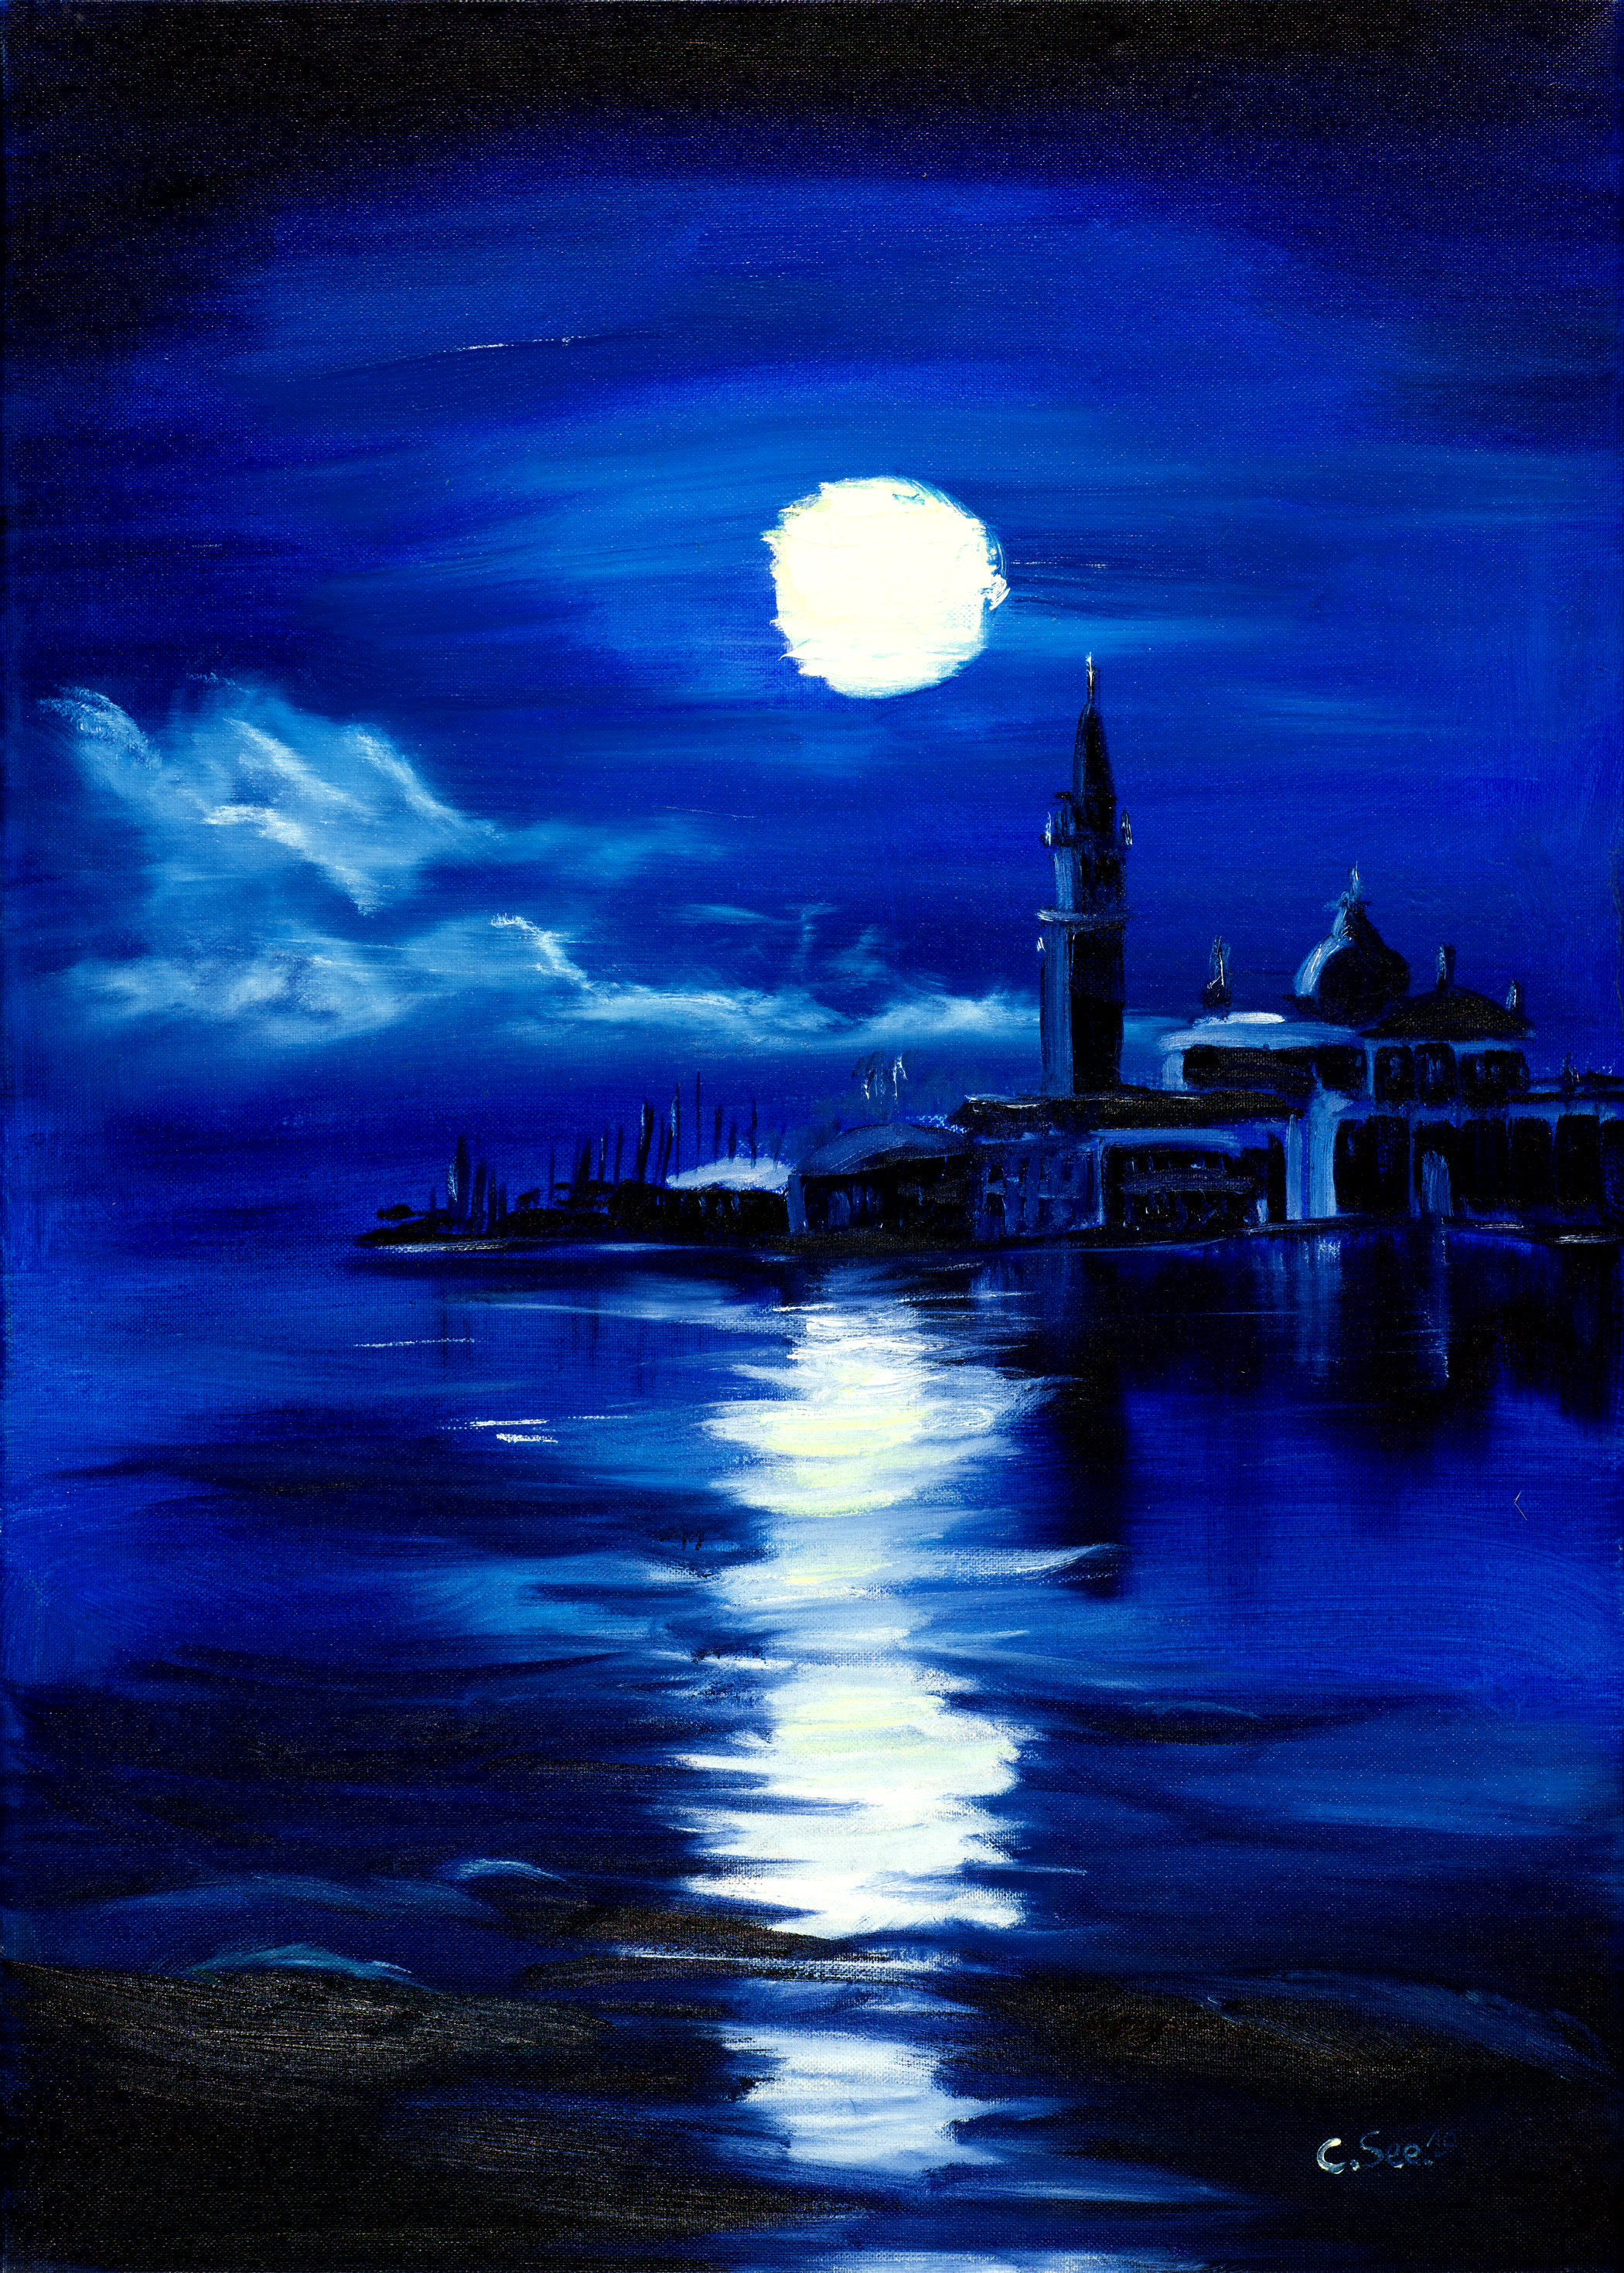 San Giorgio in Venice in the full moon by Christian Seebauer